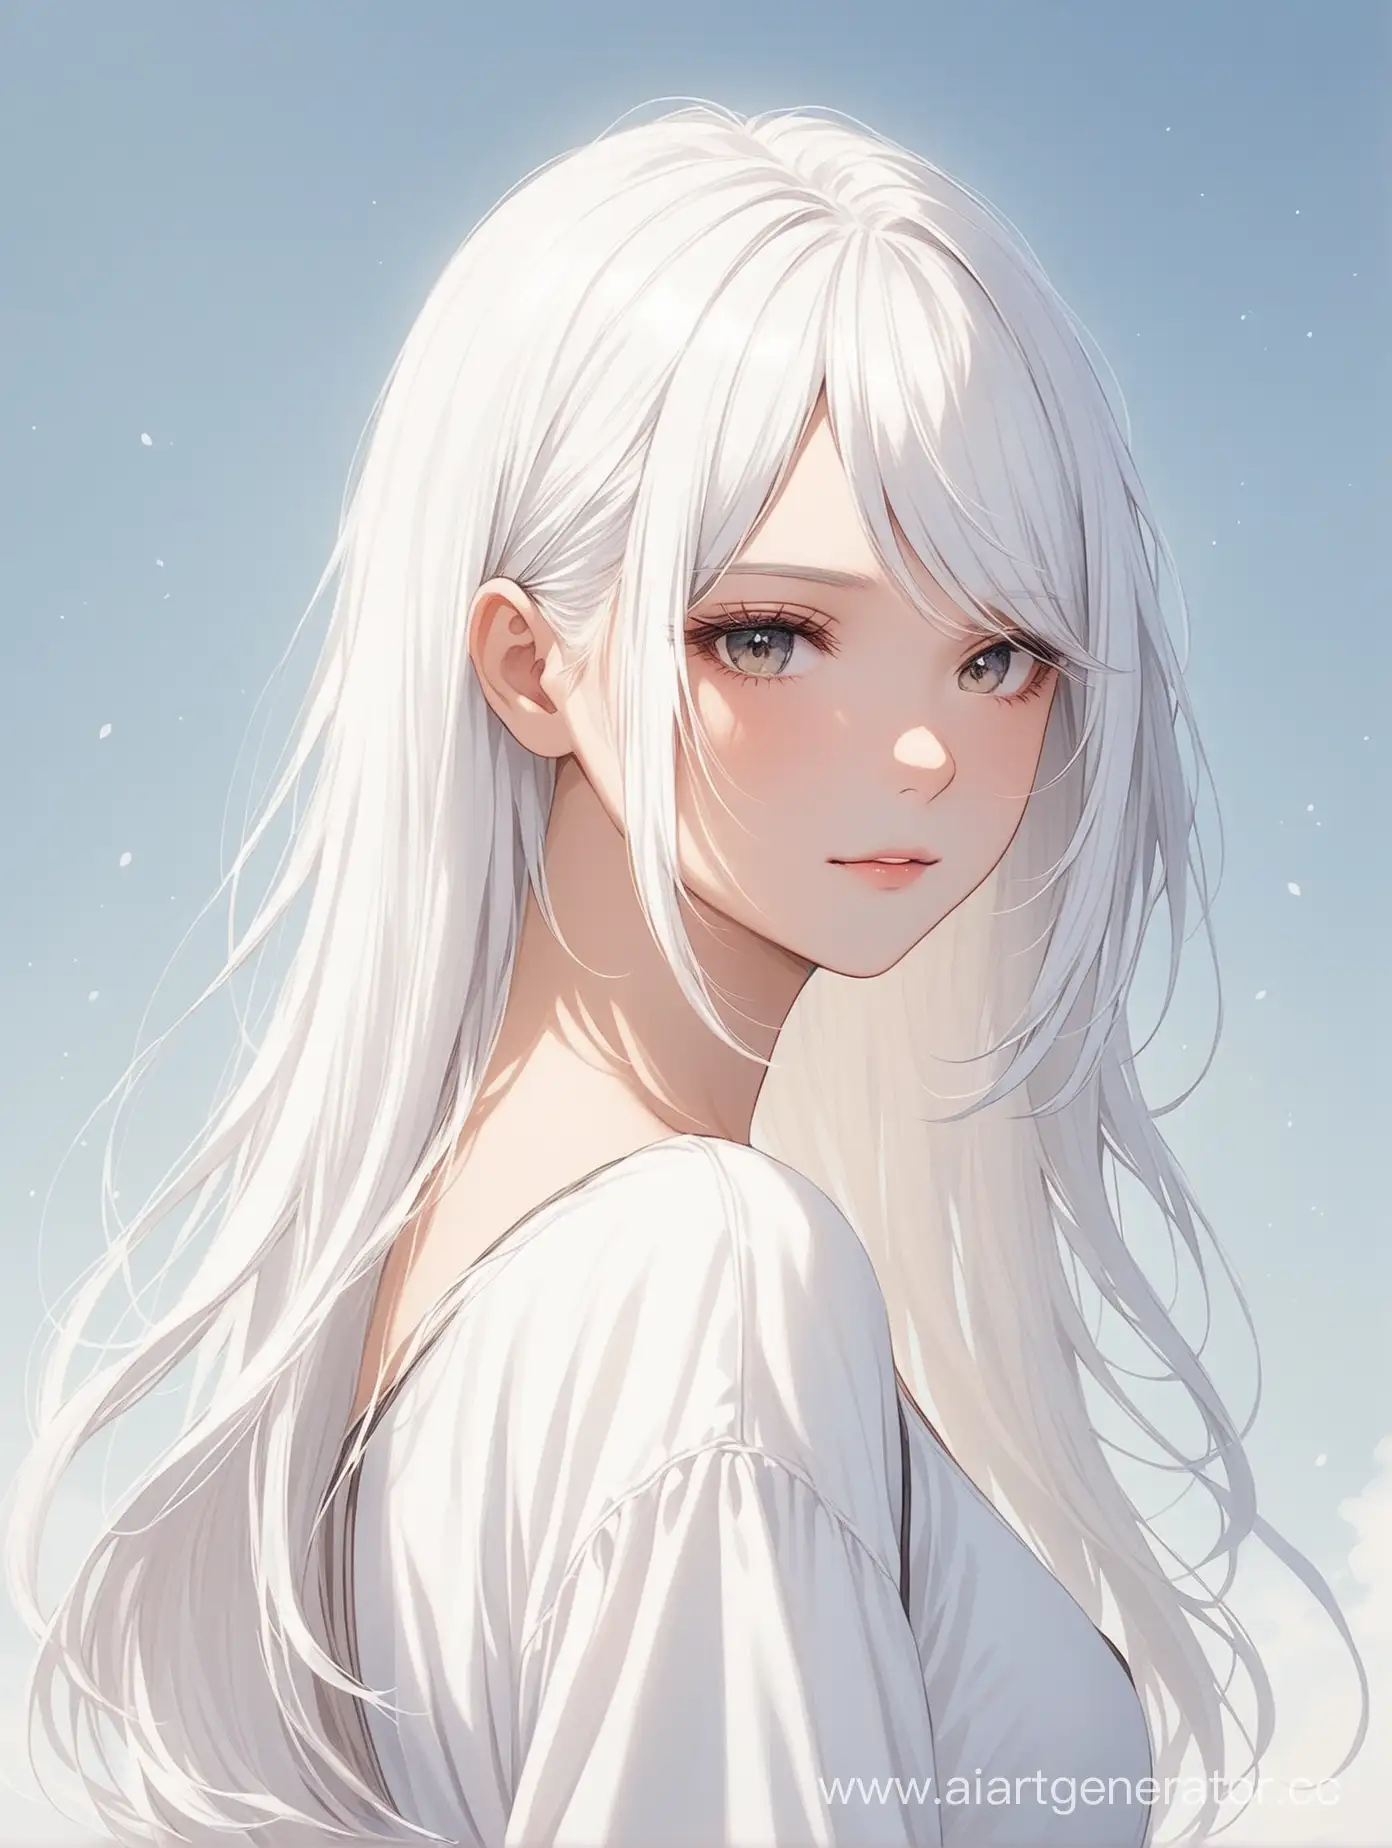 Enigmatic-Girl-with-Ethereal-White-Hair